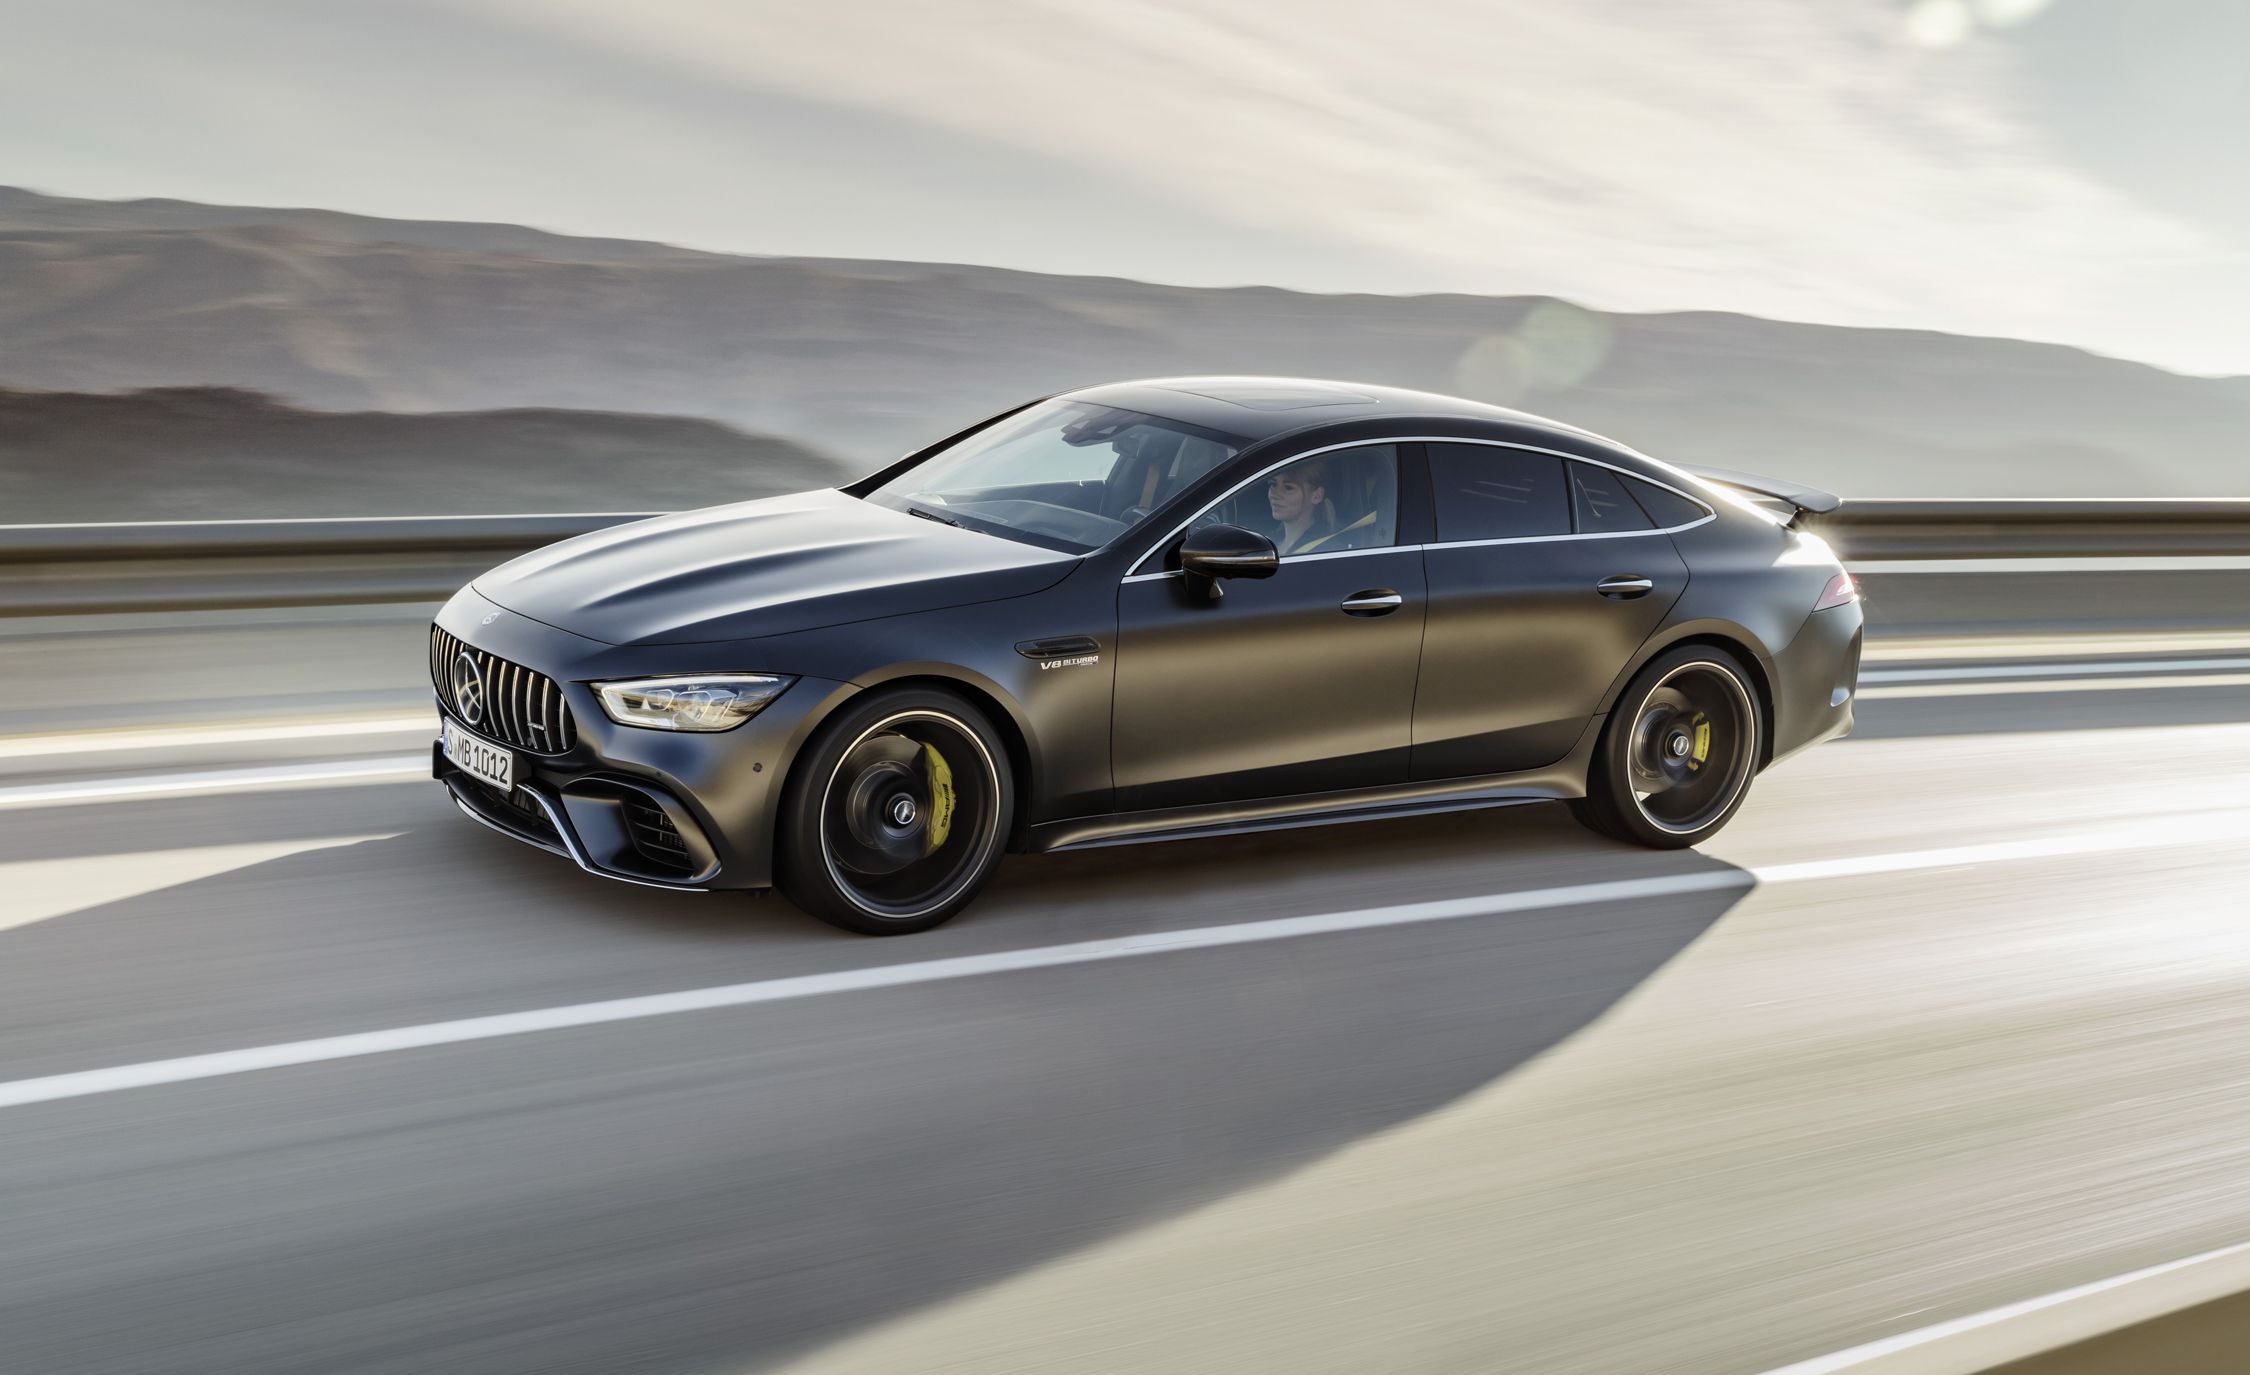 19 Mercedes Amg Gt 4 Door Coupe Pricing Announced